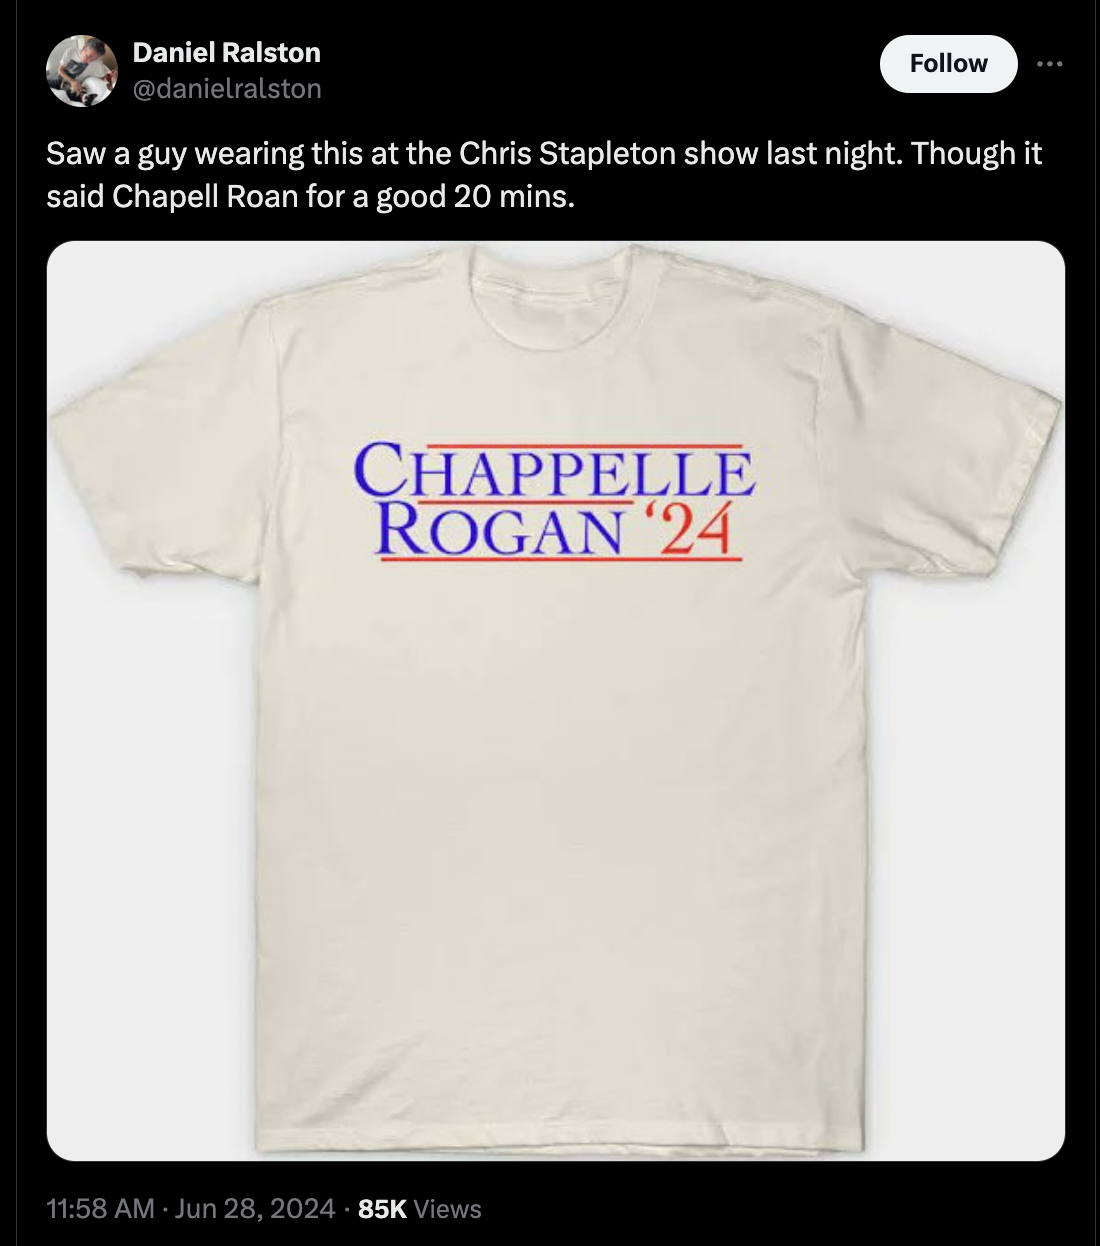 active shirt - Daniel Ralston Saw a guy wearing this at the Chris Stapleton show last night. Though it said Chapell Roan for a good 20 mins. Chappelle Rogan '24 85K Views